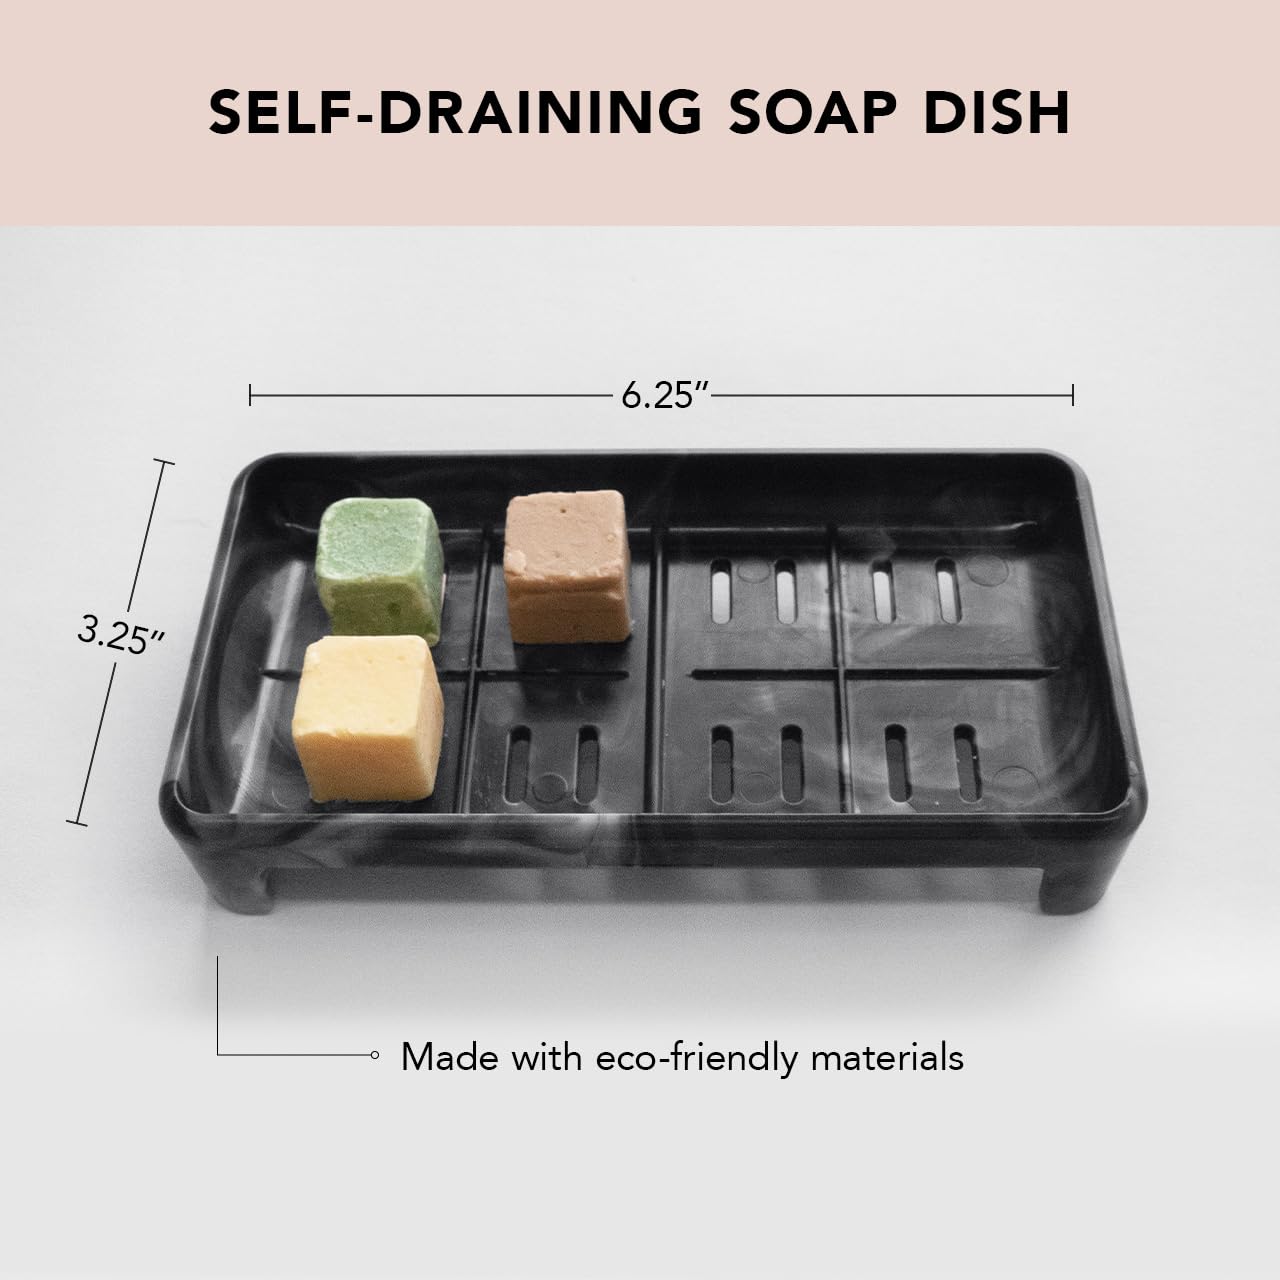 Kitsch Soap Dish for Shower - Self Draining Bar Soap Holder for Shower Recycled Plastic Soap Saver for All Soap Sizes | Soap Dishes for Bar Soap | Soap Tray for Bathrooms, Black